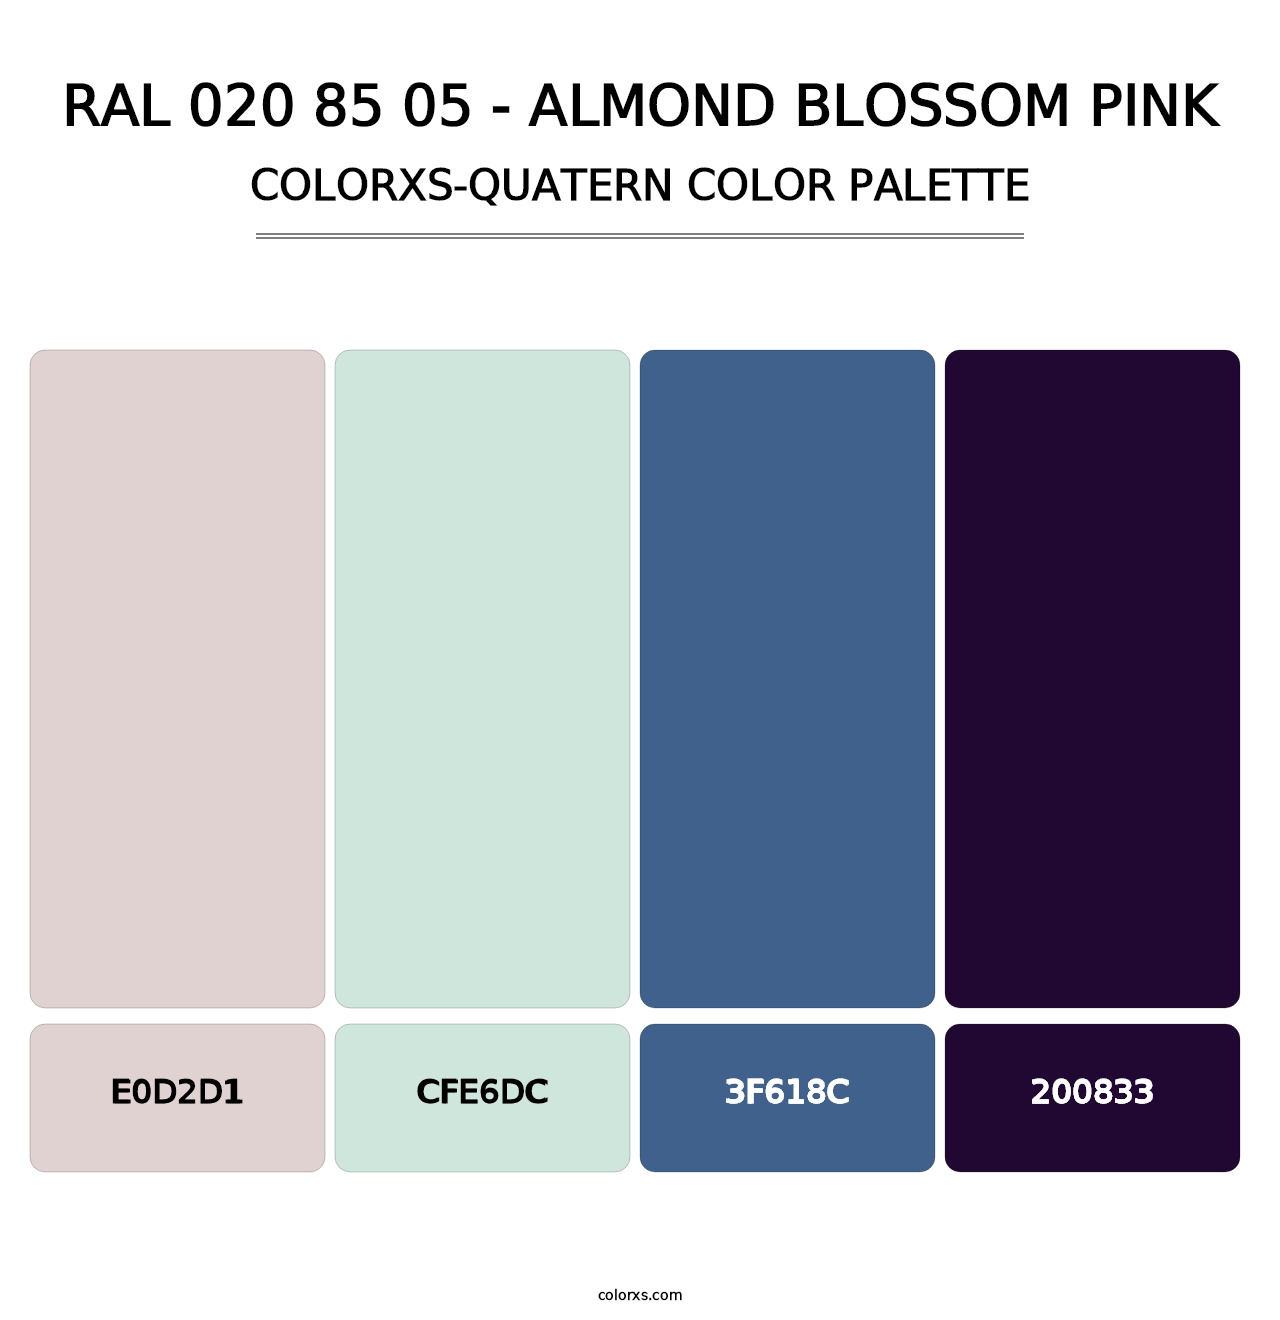 RAL 020 85 05 - Almond Blossom Pink - Colorxs Quatern Palette